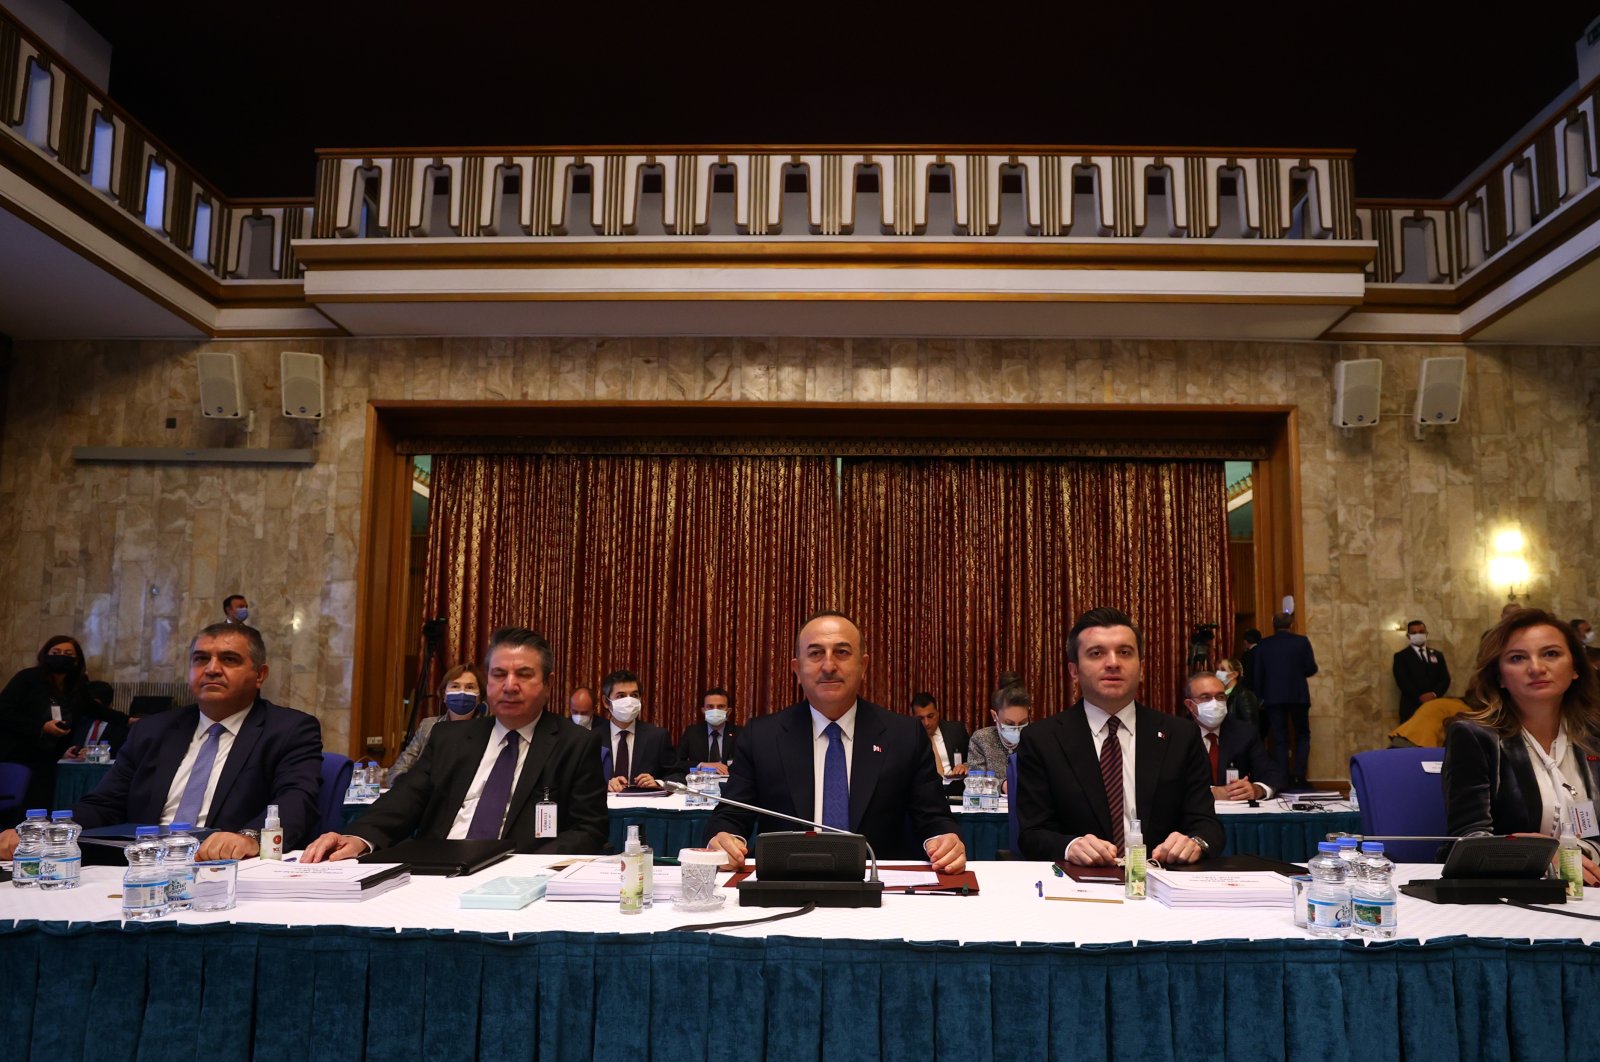 Foreign Minister Mevlüt Çavuşoğlu (C) speaks at the Planning and Budget Committee of the Grand National Assembly of Turkey (TBMM) in the capital Ankara, Turkey, Nov. 4, 2021. (AA Photo)